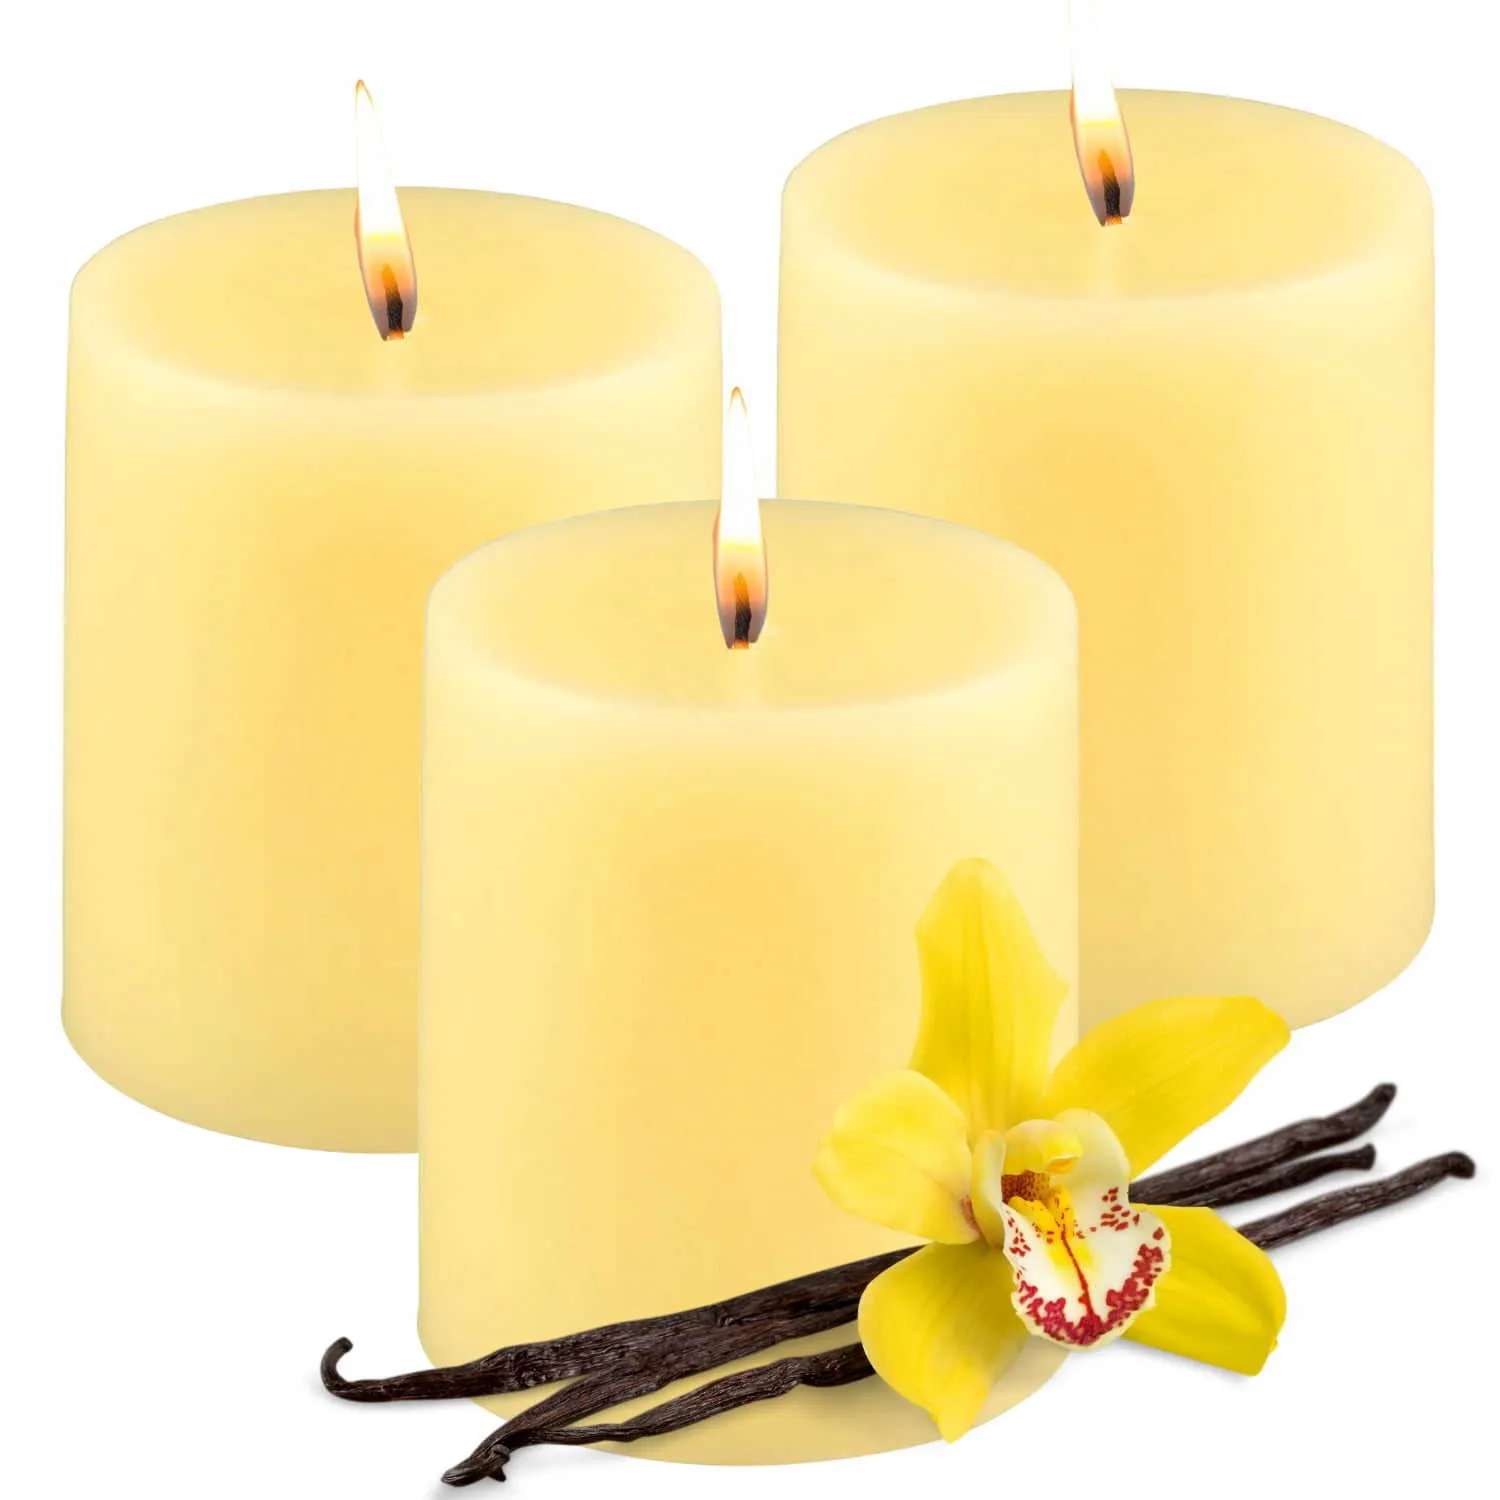 Scented Candle Candles for Home Scented Vanilla Scented Candles 3 Pack Scented Pillar Candles Z0418